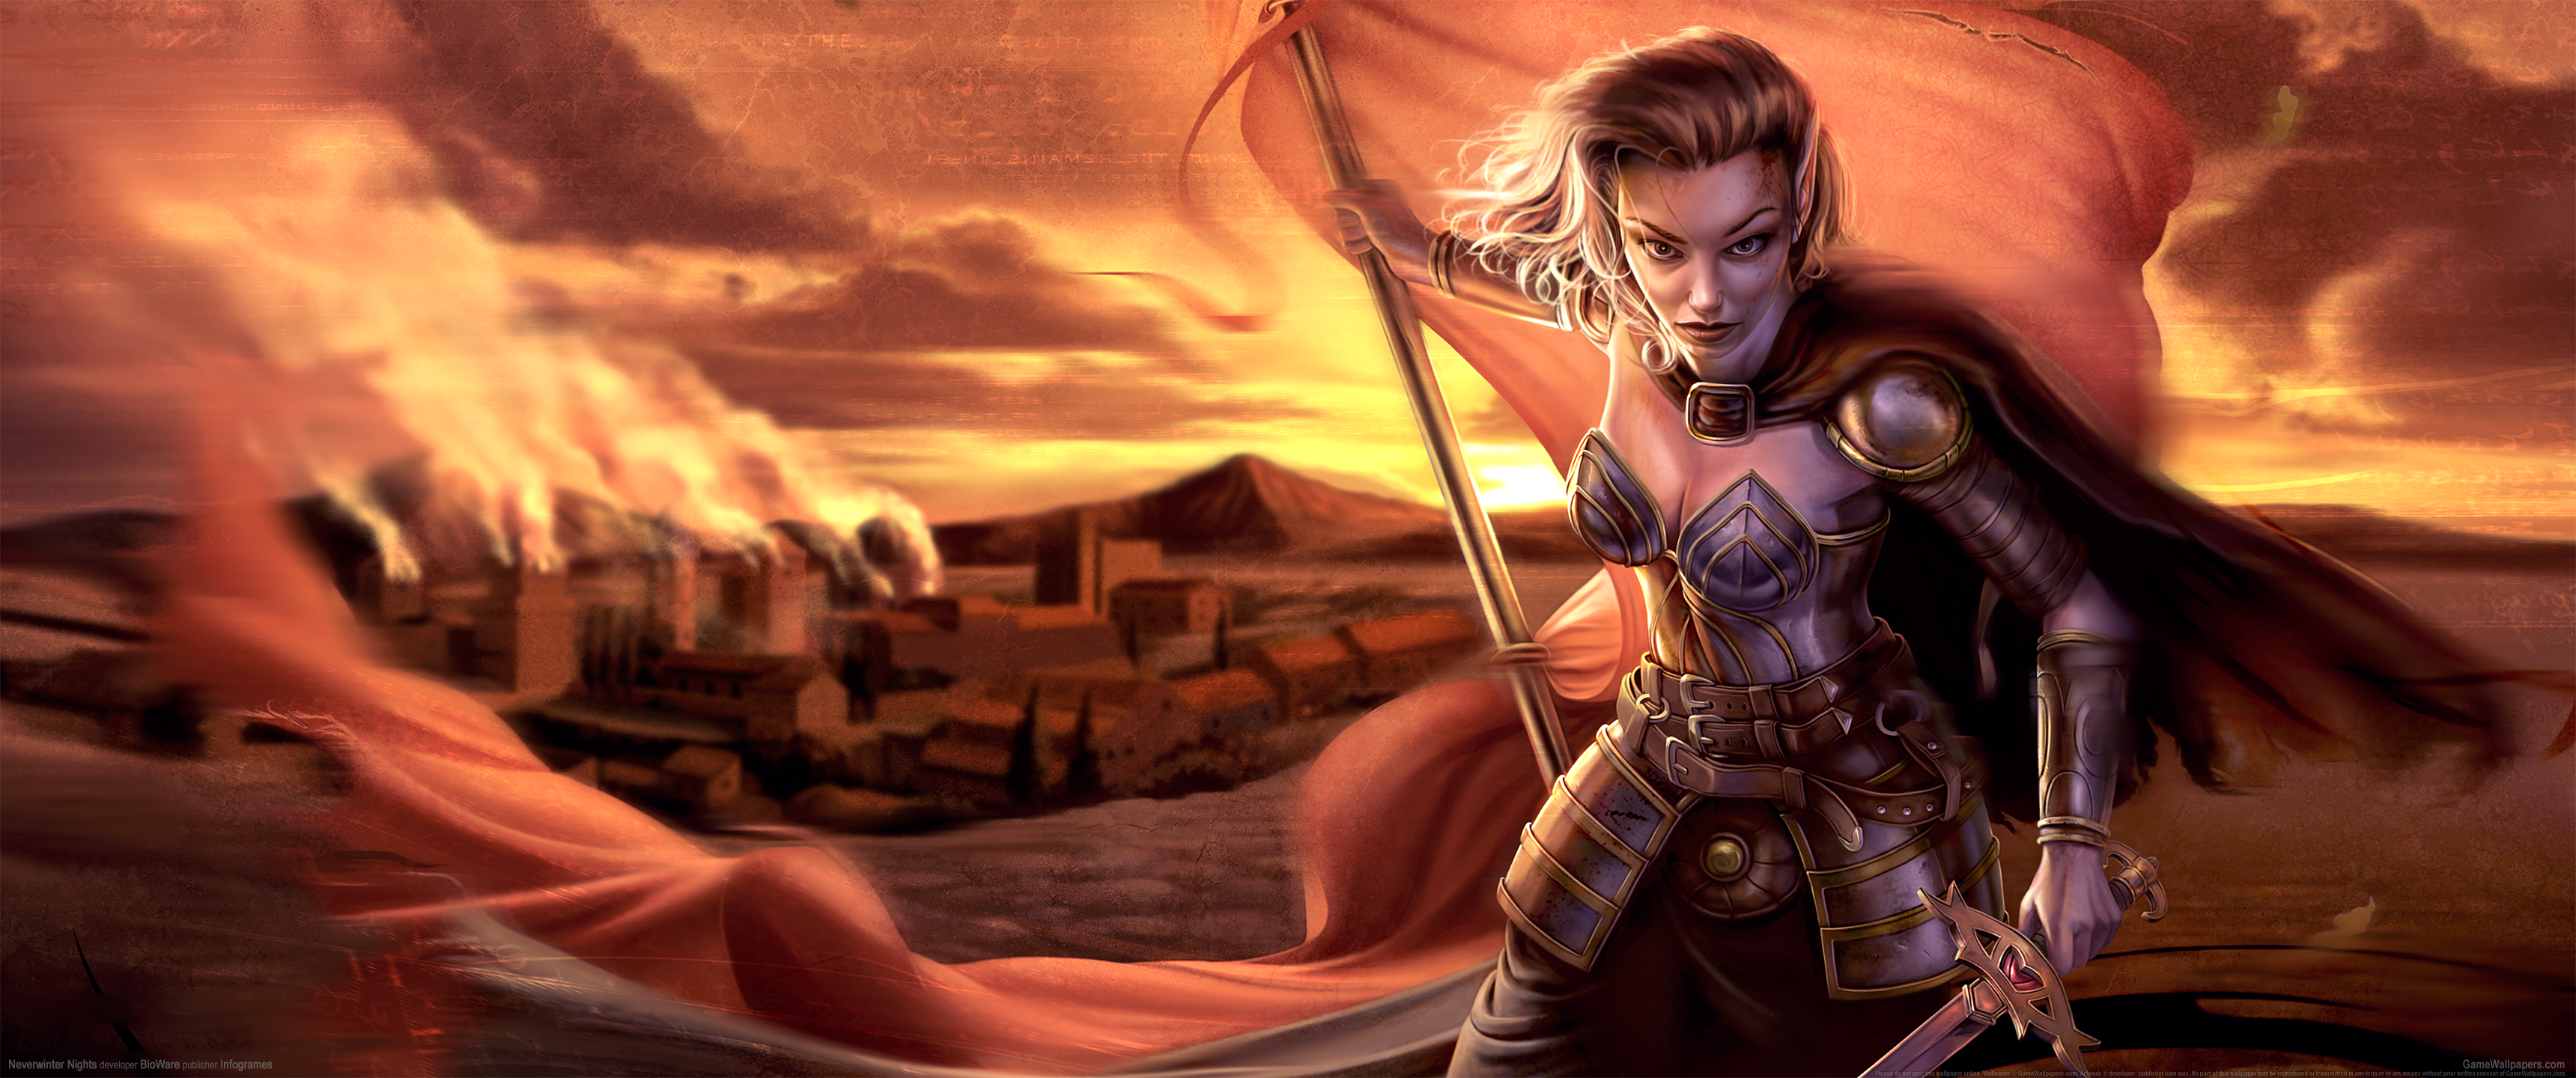 Neverwinter Nights 3440x1440 wallpaper or background 11